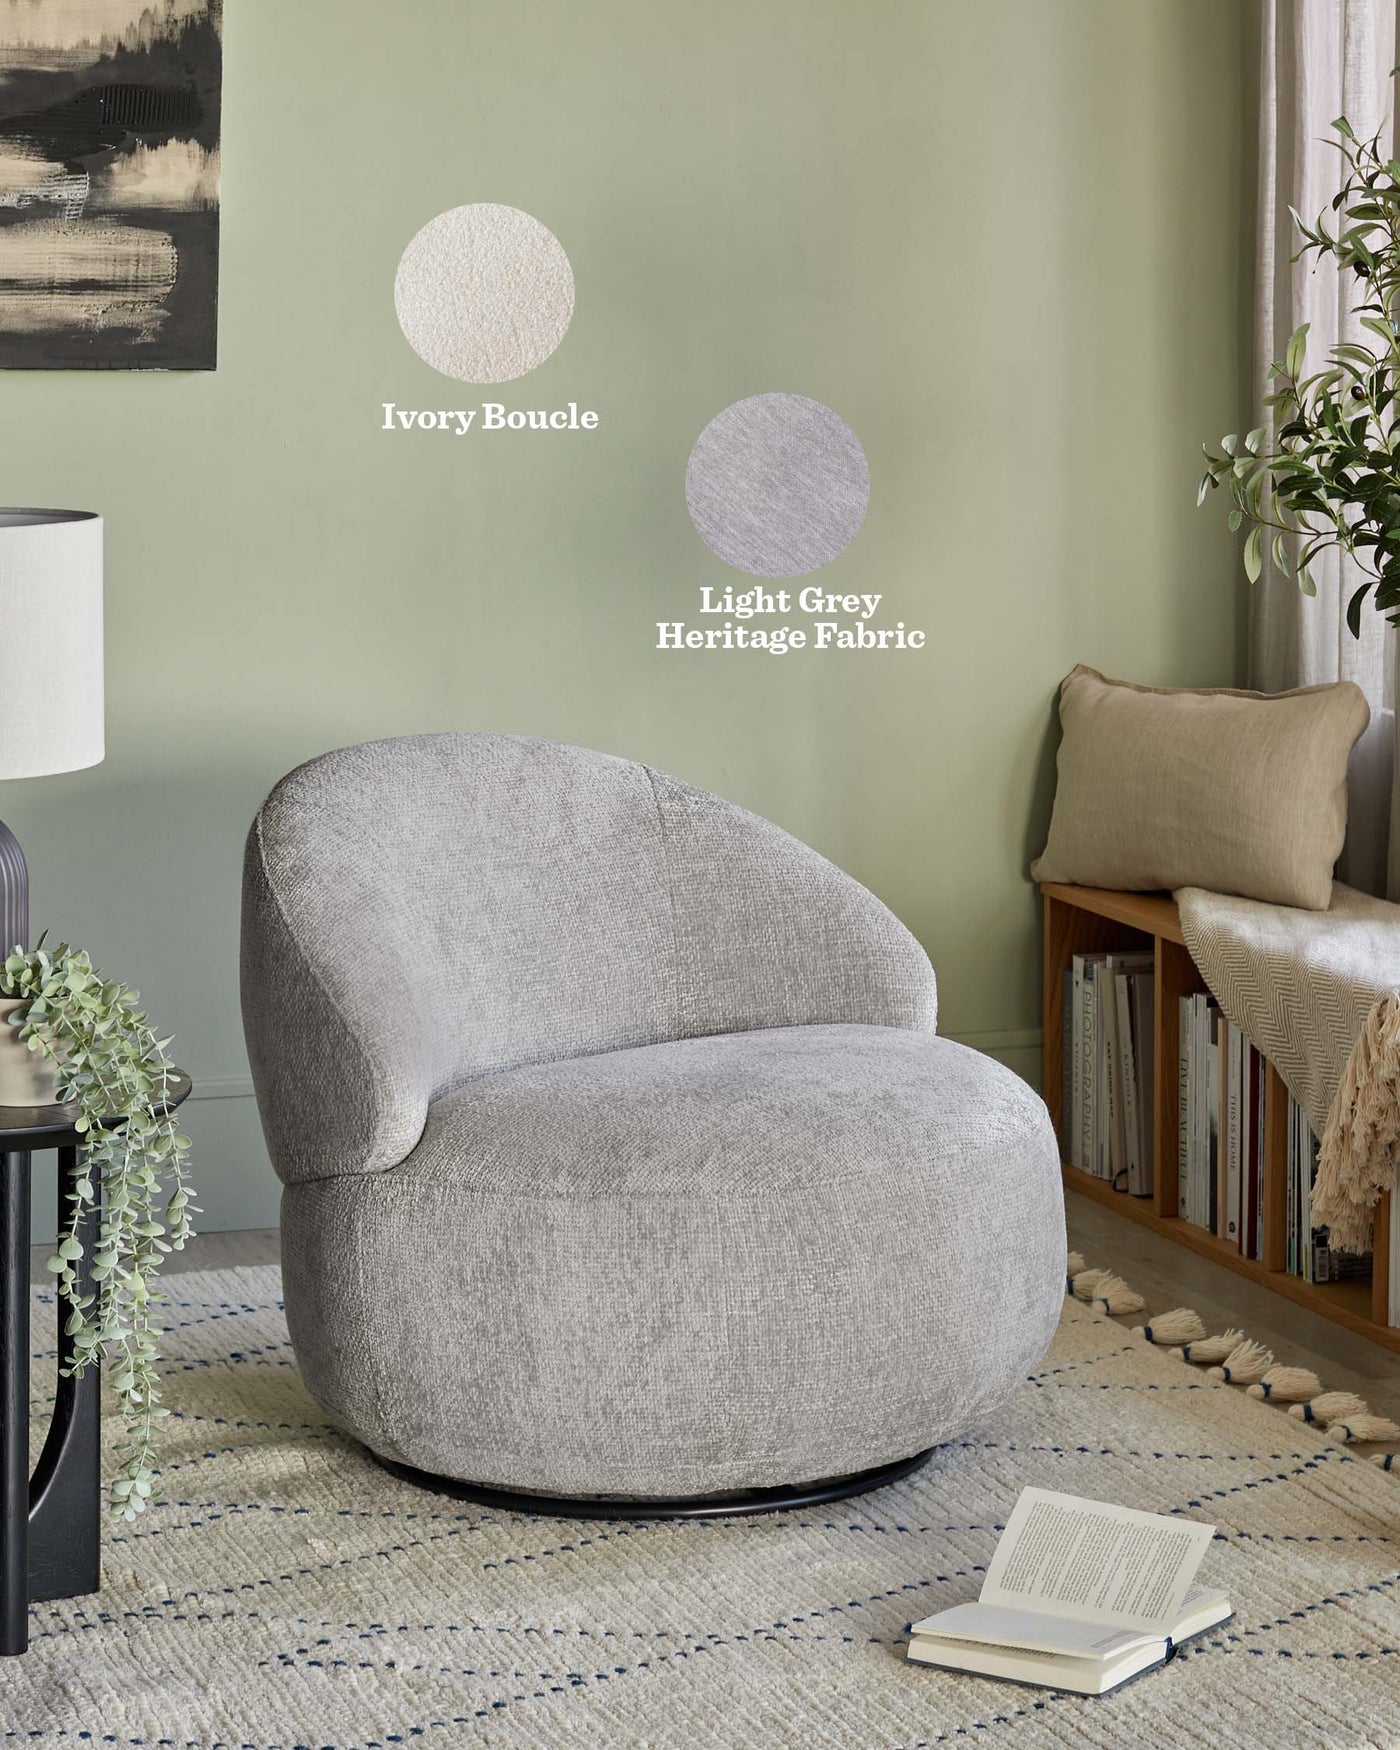 Contemporary light grey fabric upholstered armchair with a rounded, organic design, featuring a raised backrest and a wide, comfortable seat. The chair is positioned on a textured area rug with a neutral palette accented with blue lines, alongside a small side table with cascading greenery. In the background, a cosy nook is seen with a tan cushioned reading chair and a stack of books on a wooden shelf, enhancing the tranquil and inviting ambiance of the space.